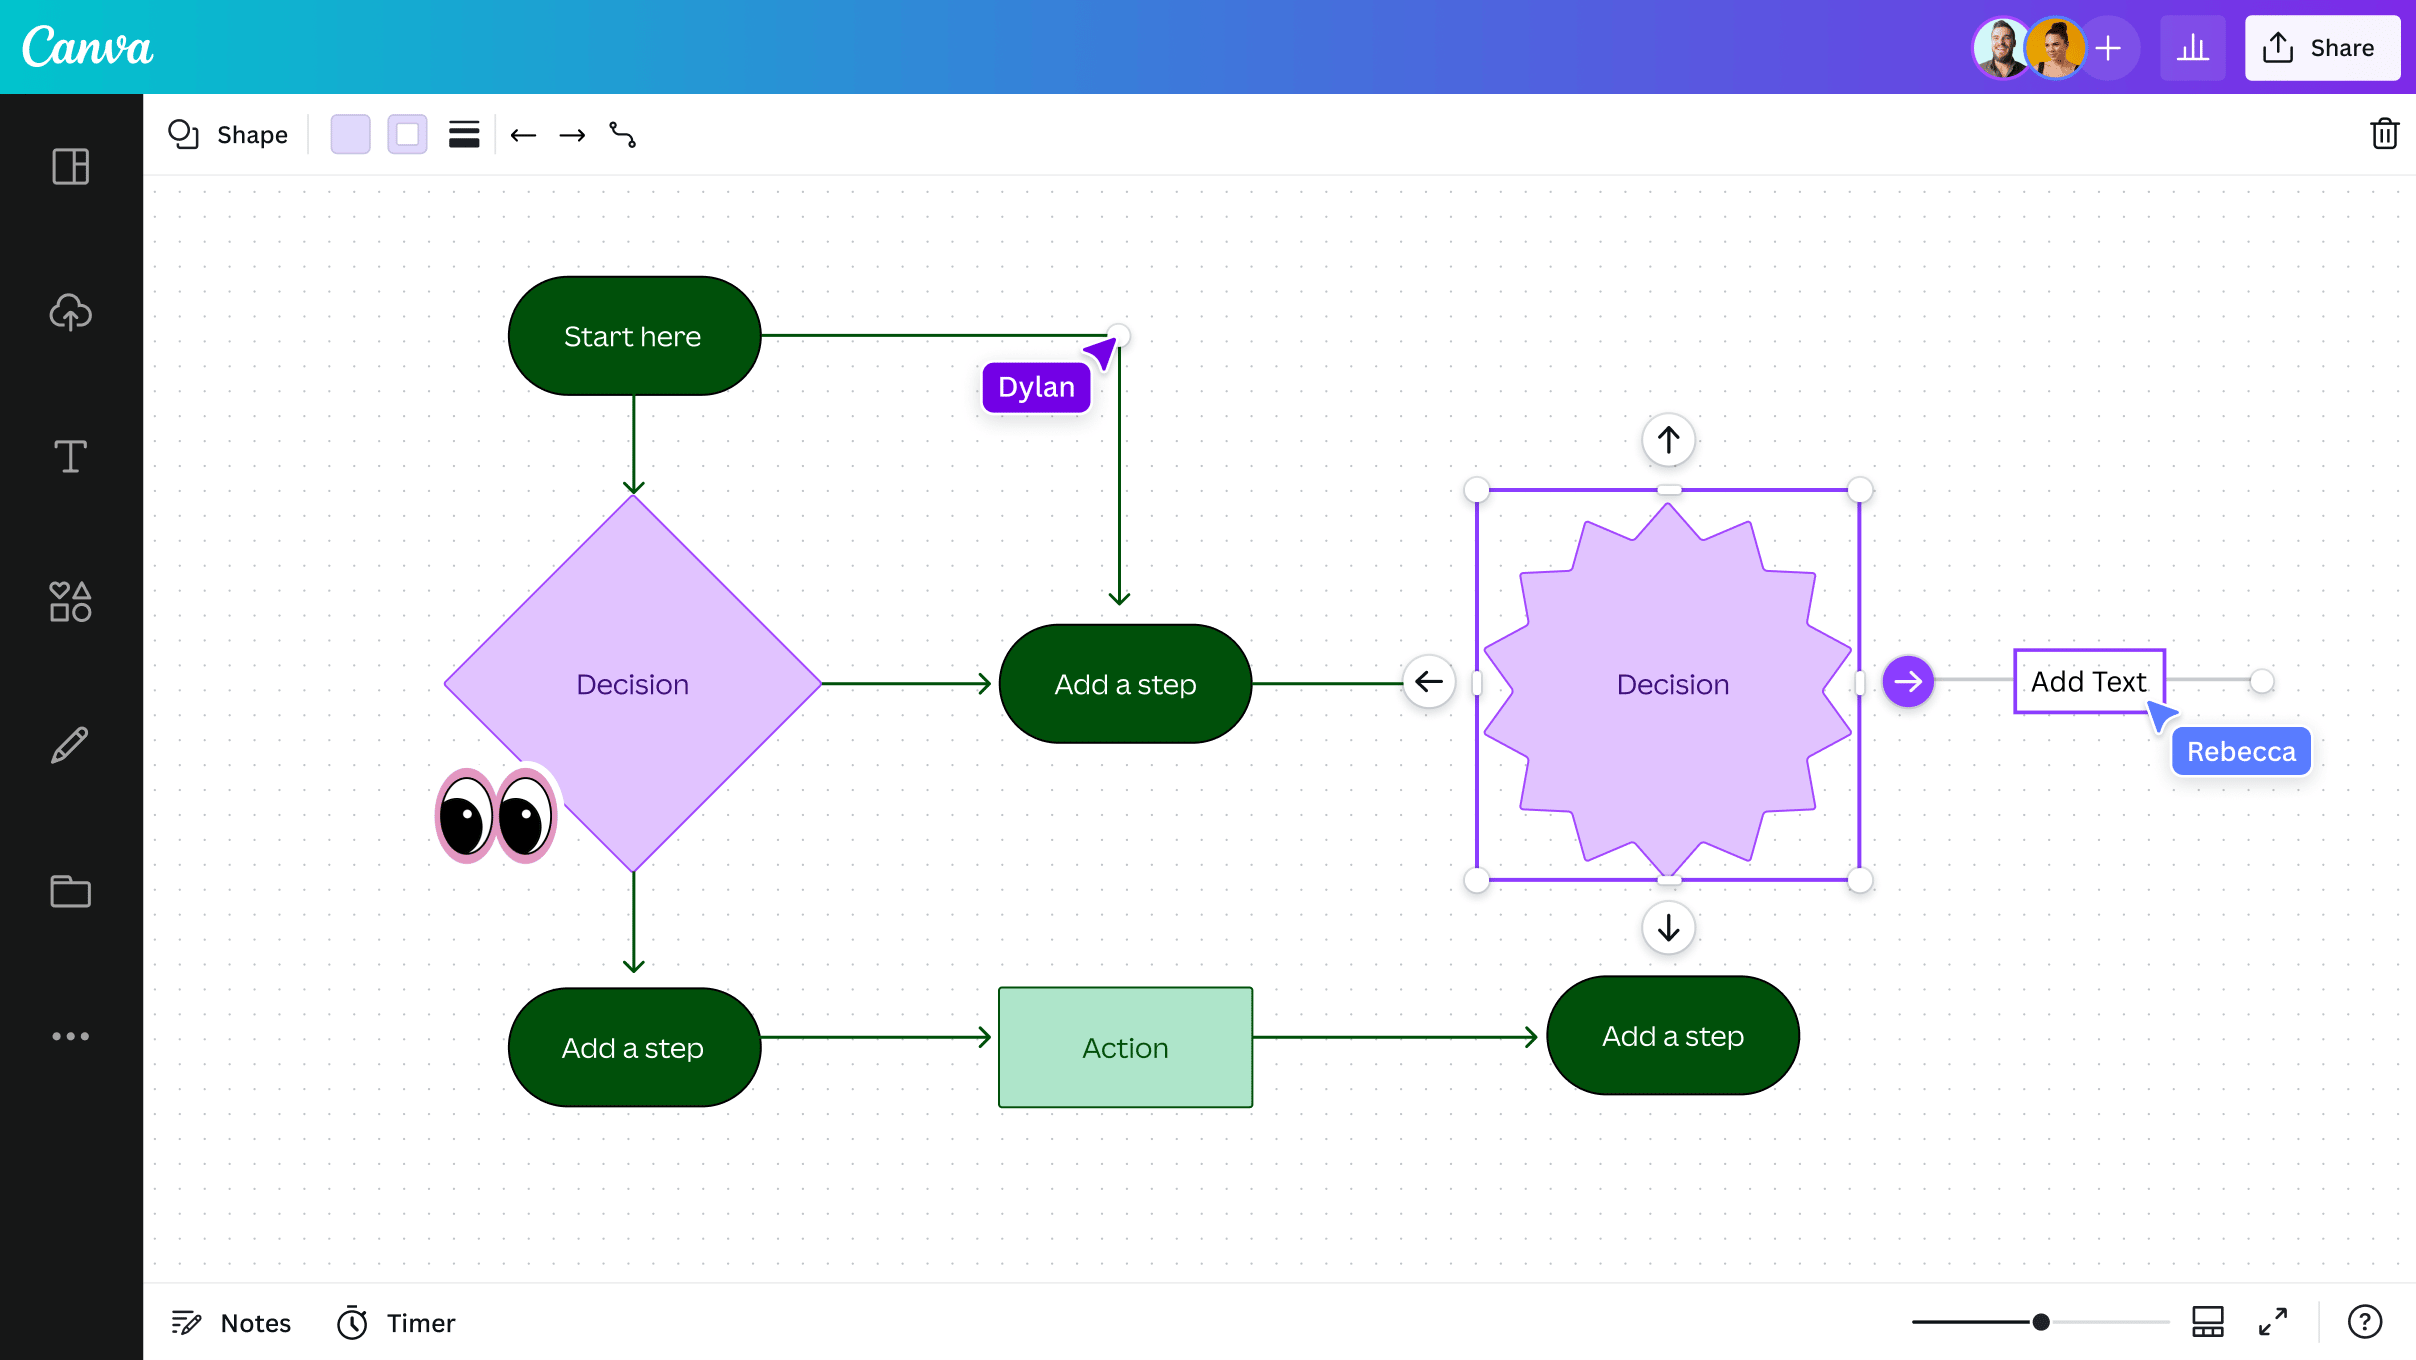 Introducing the World's First AI Workflow Generator!